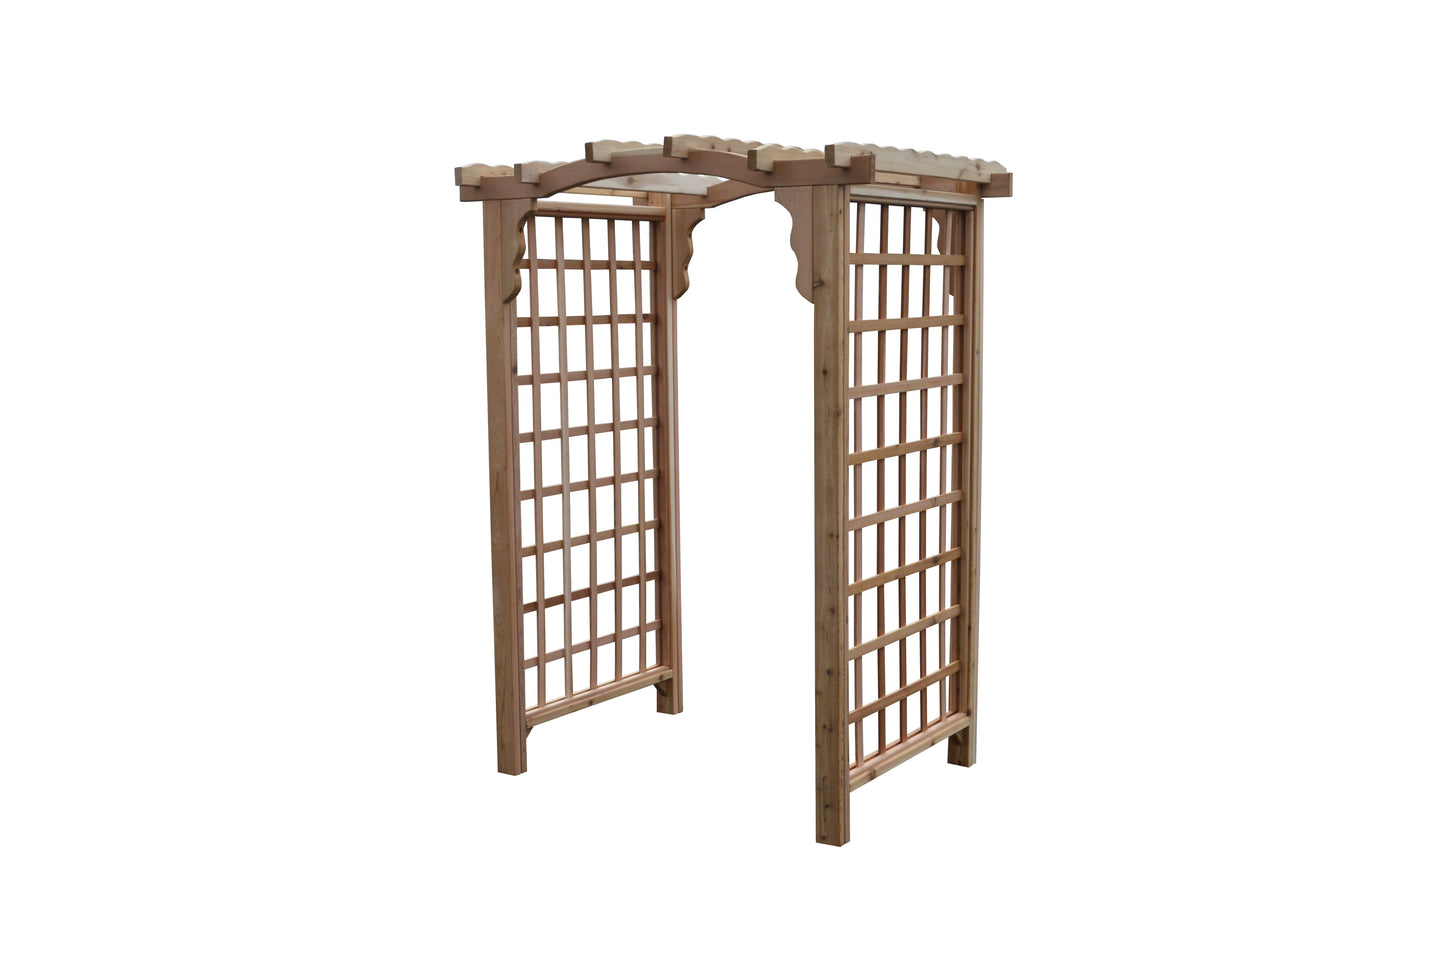 A&L Furniture Co. Western Red Cedar 4' Cambridge Arbor - LEAD TIME TO SHIP 4 WEEKS OR LESS